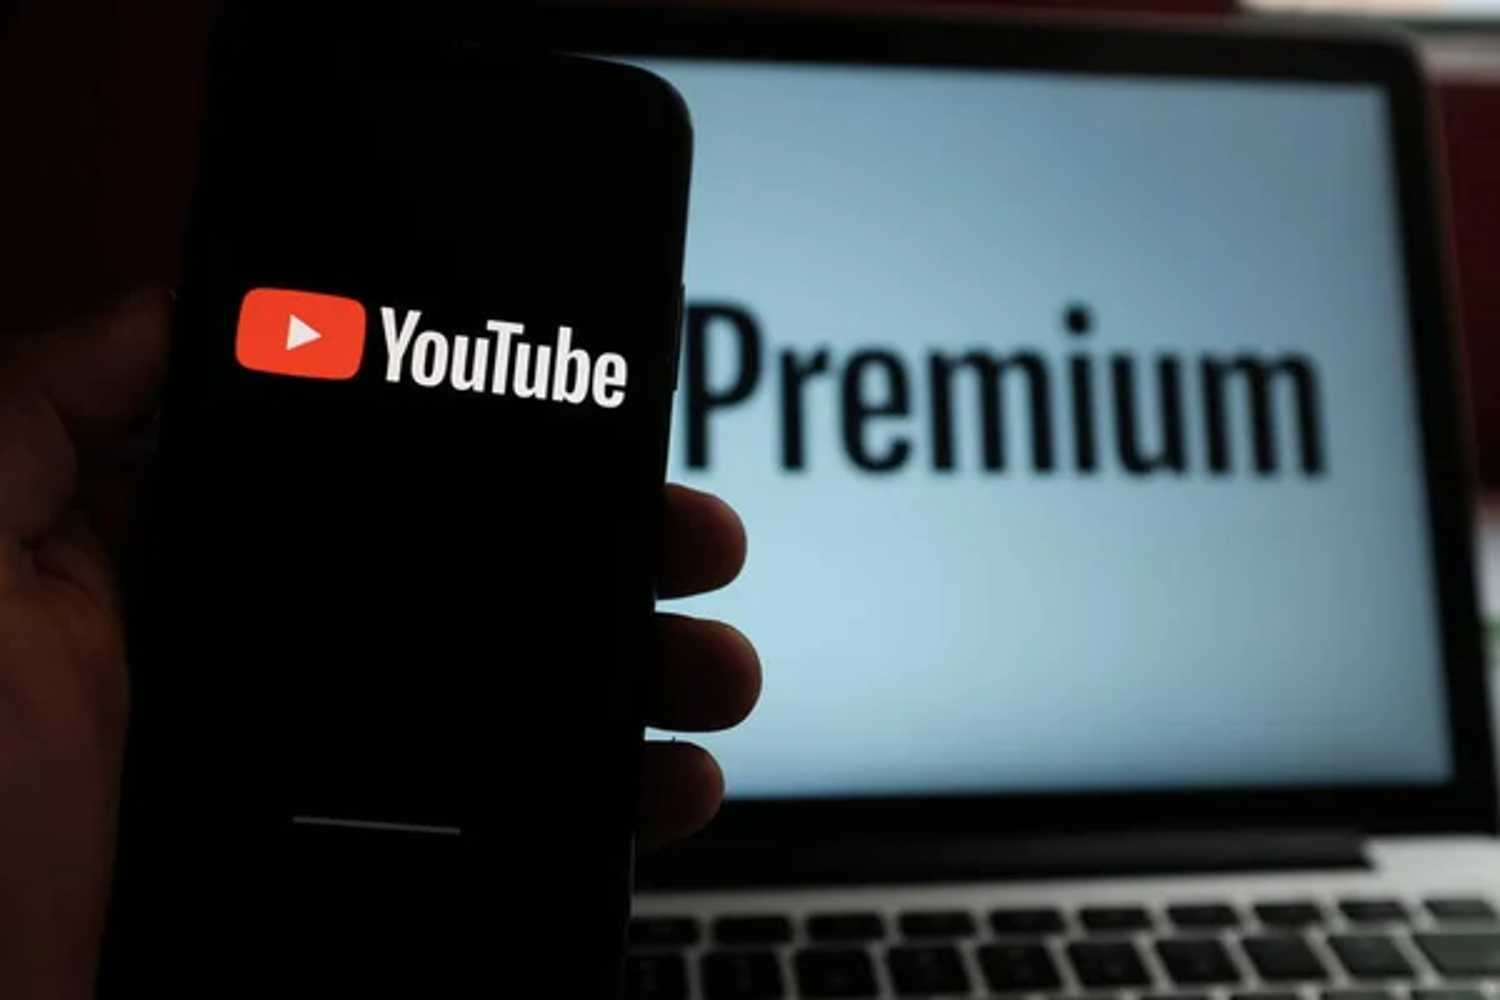 Apart from Snapchat, YouTube and Twitter also try out paid versions